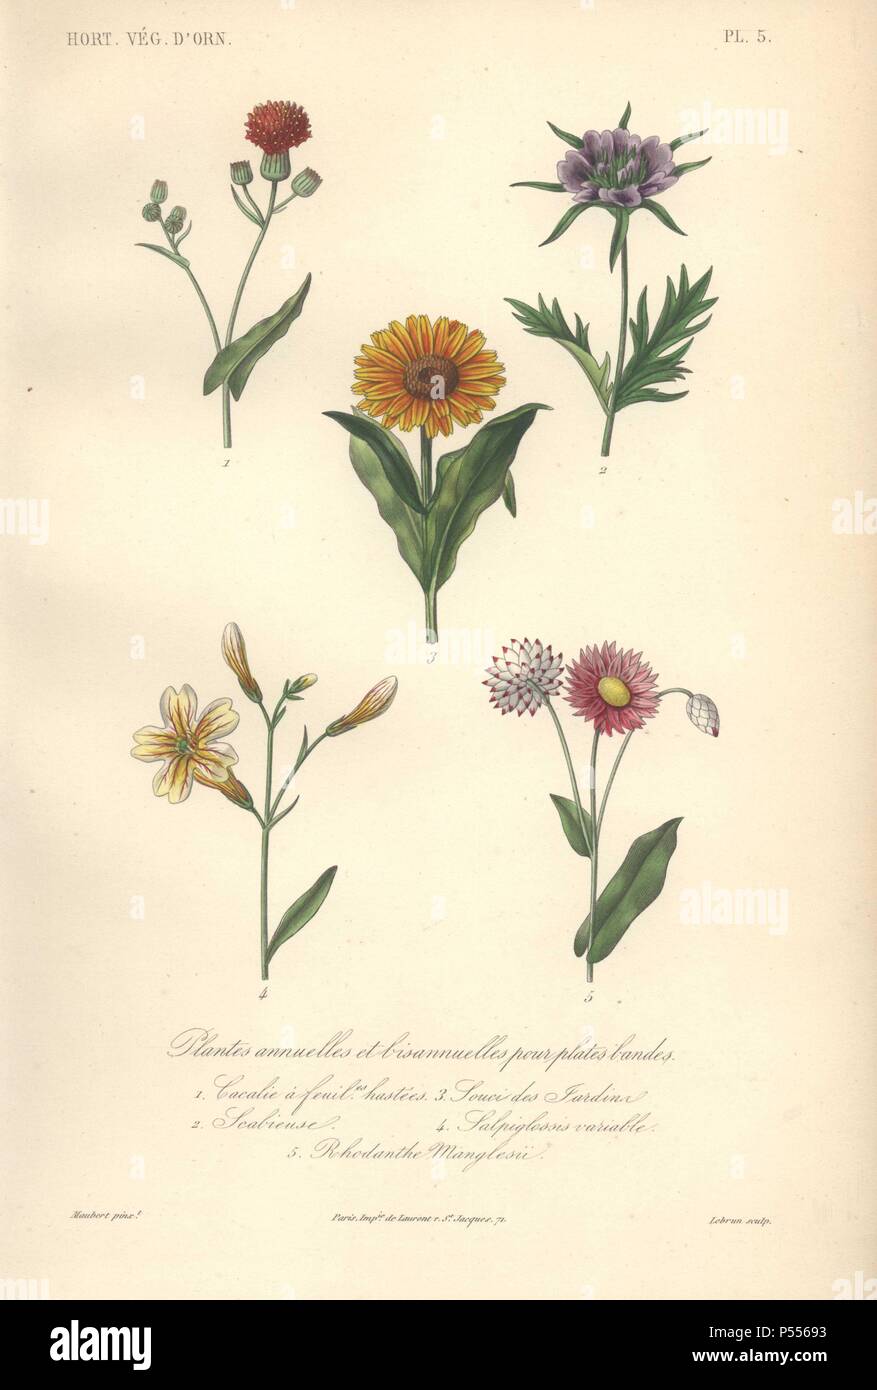 Five annuals: scarlet arnoglossum (Cacalia hastata), teasel (Scabiosa), pot marigold (Calendula officinalis), painted tongue (Salpiglossis sinuata) and purple rhodanthe (Rhodanthe manglesii).. . Plantes Annuelles: 1) Cacalie a Feuilles Hastees 2) Scabieuse 3) Souci des Jardins 4) Salpiglossis Variable 5) Rhodanthe Manglesii . . Handcolored lithograph by Edouard Maubert for Herincq's 'Le Regne Vegetal' (1865). Stock Photo